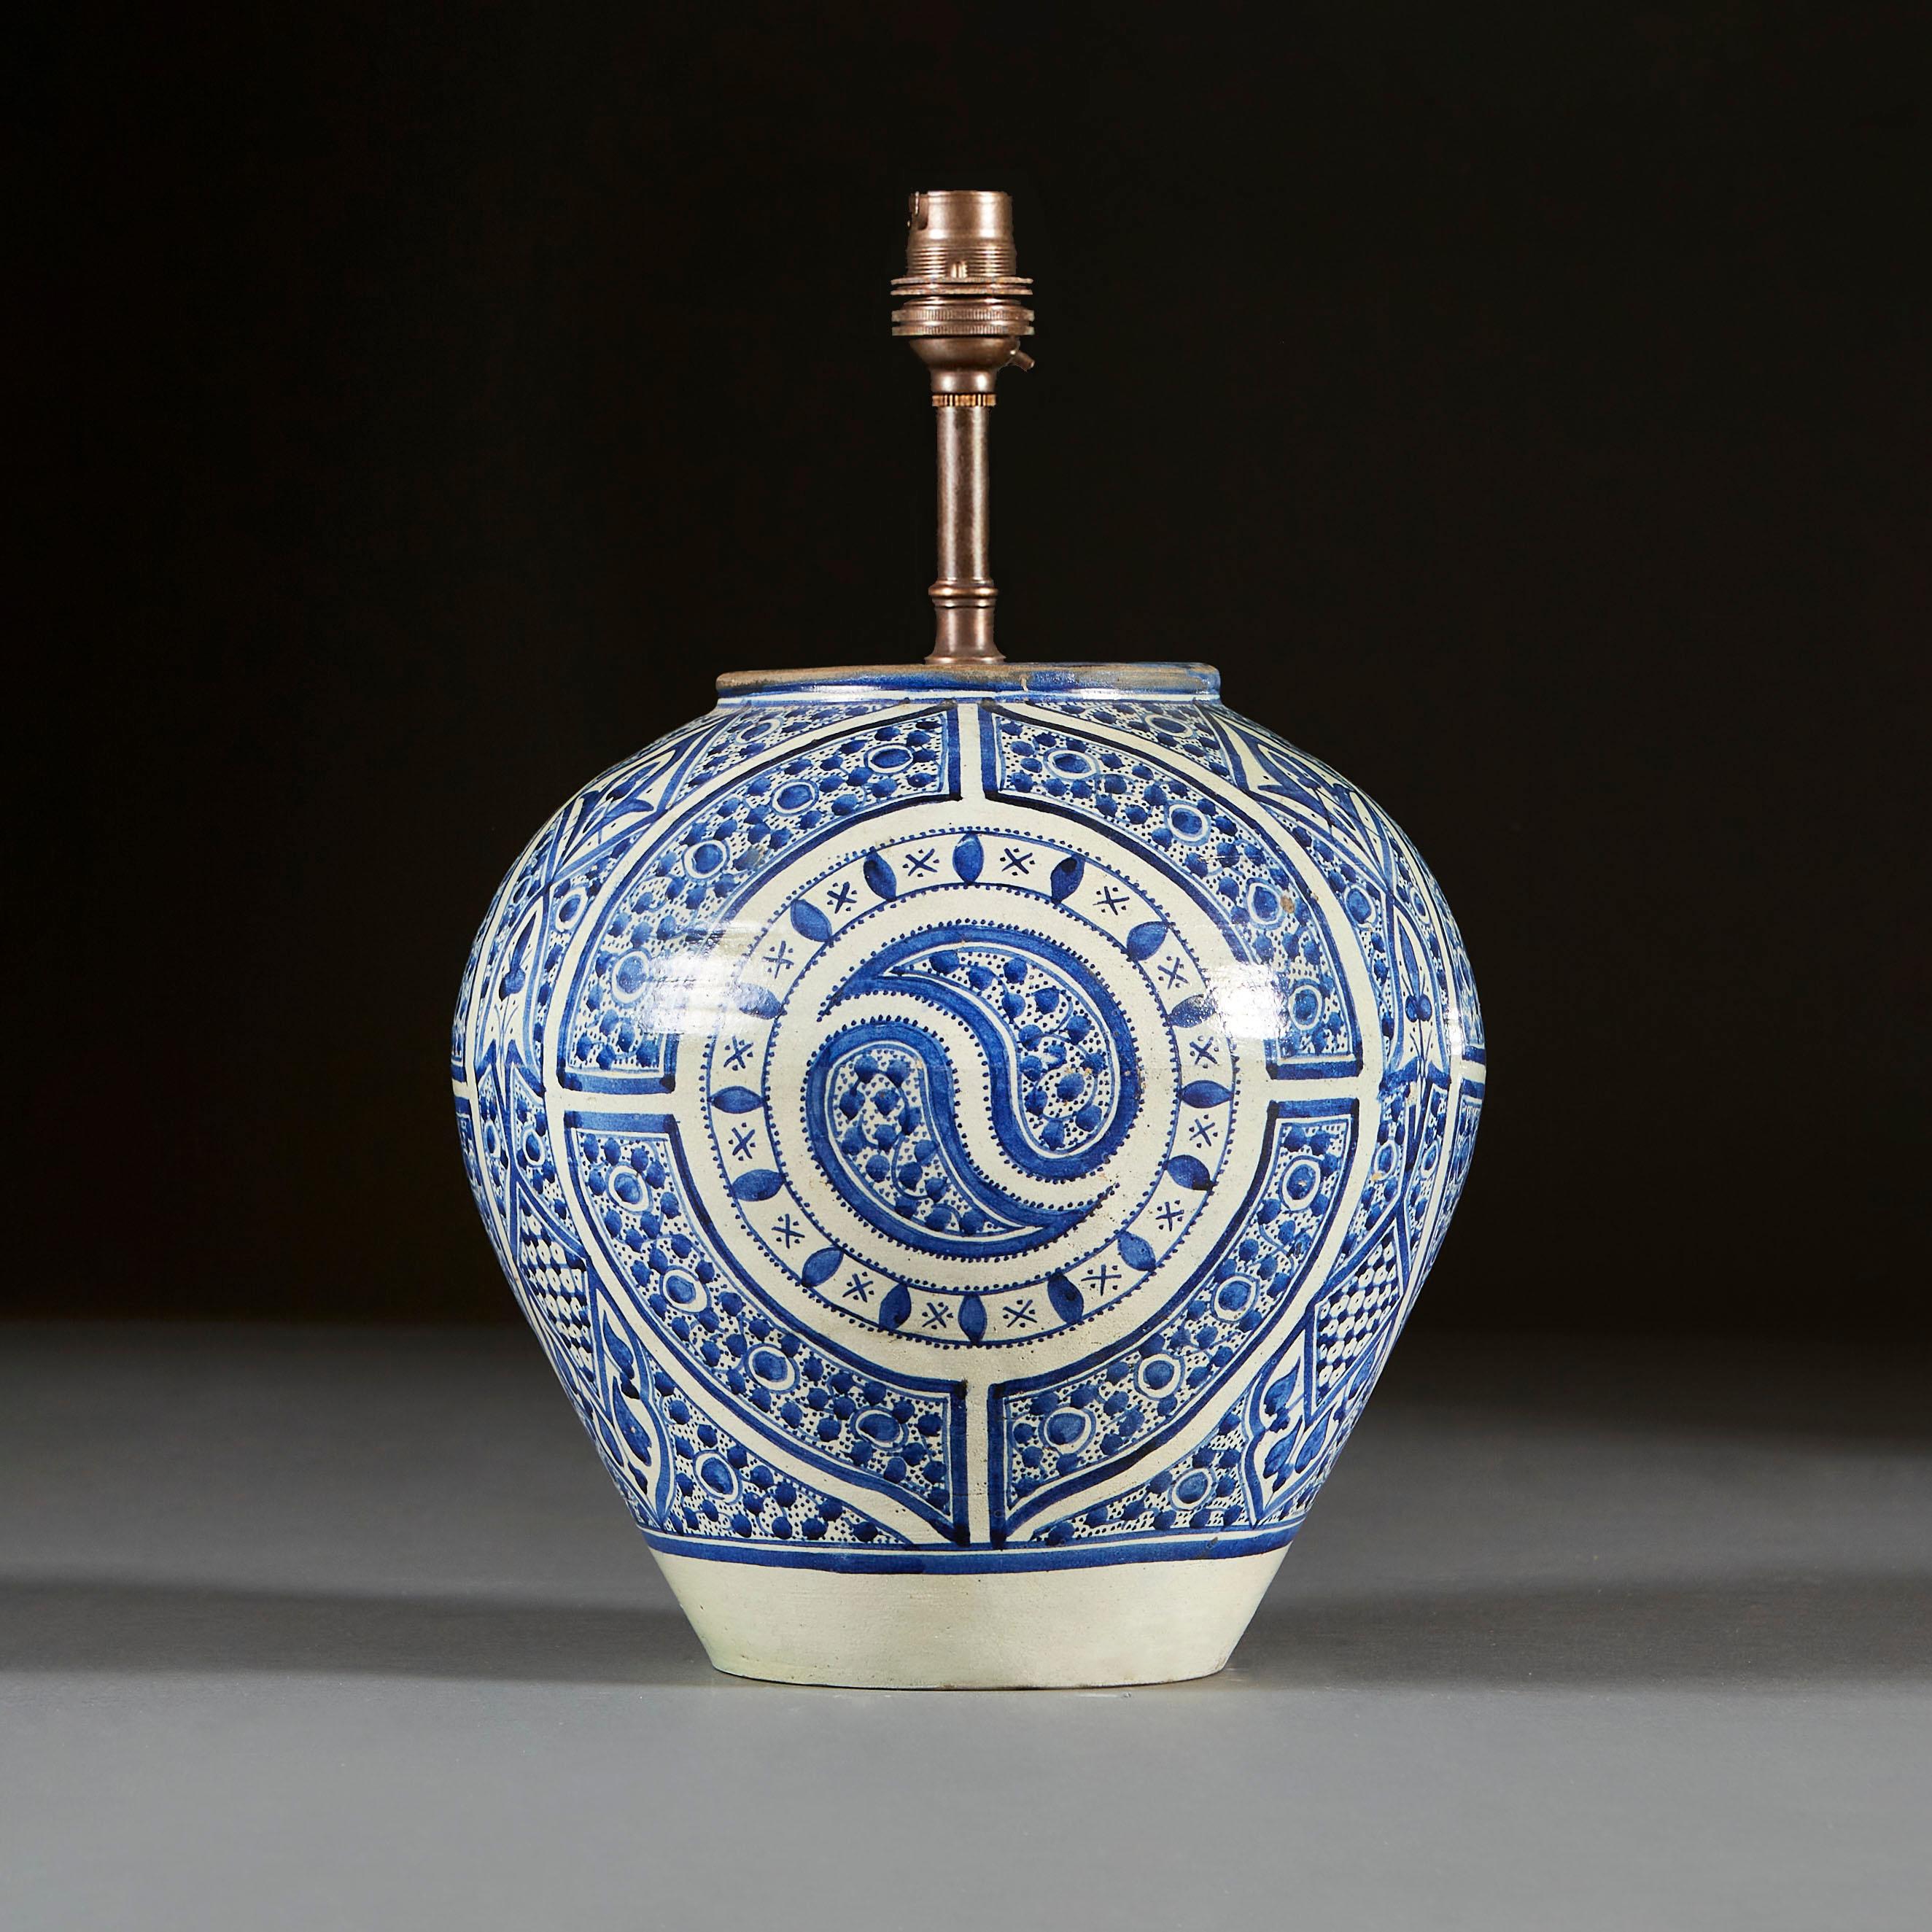 A late 19th century blue and white, bulbous vase, decorated with geometric patterns.

Currently wired for the UK with bronze colour wire with torpedo switch, with bayonet cap bulb fitting. Please enquire for rewiring services. 

Please note: